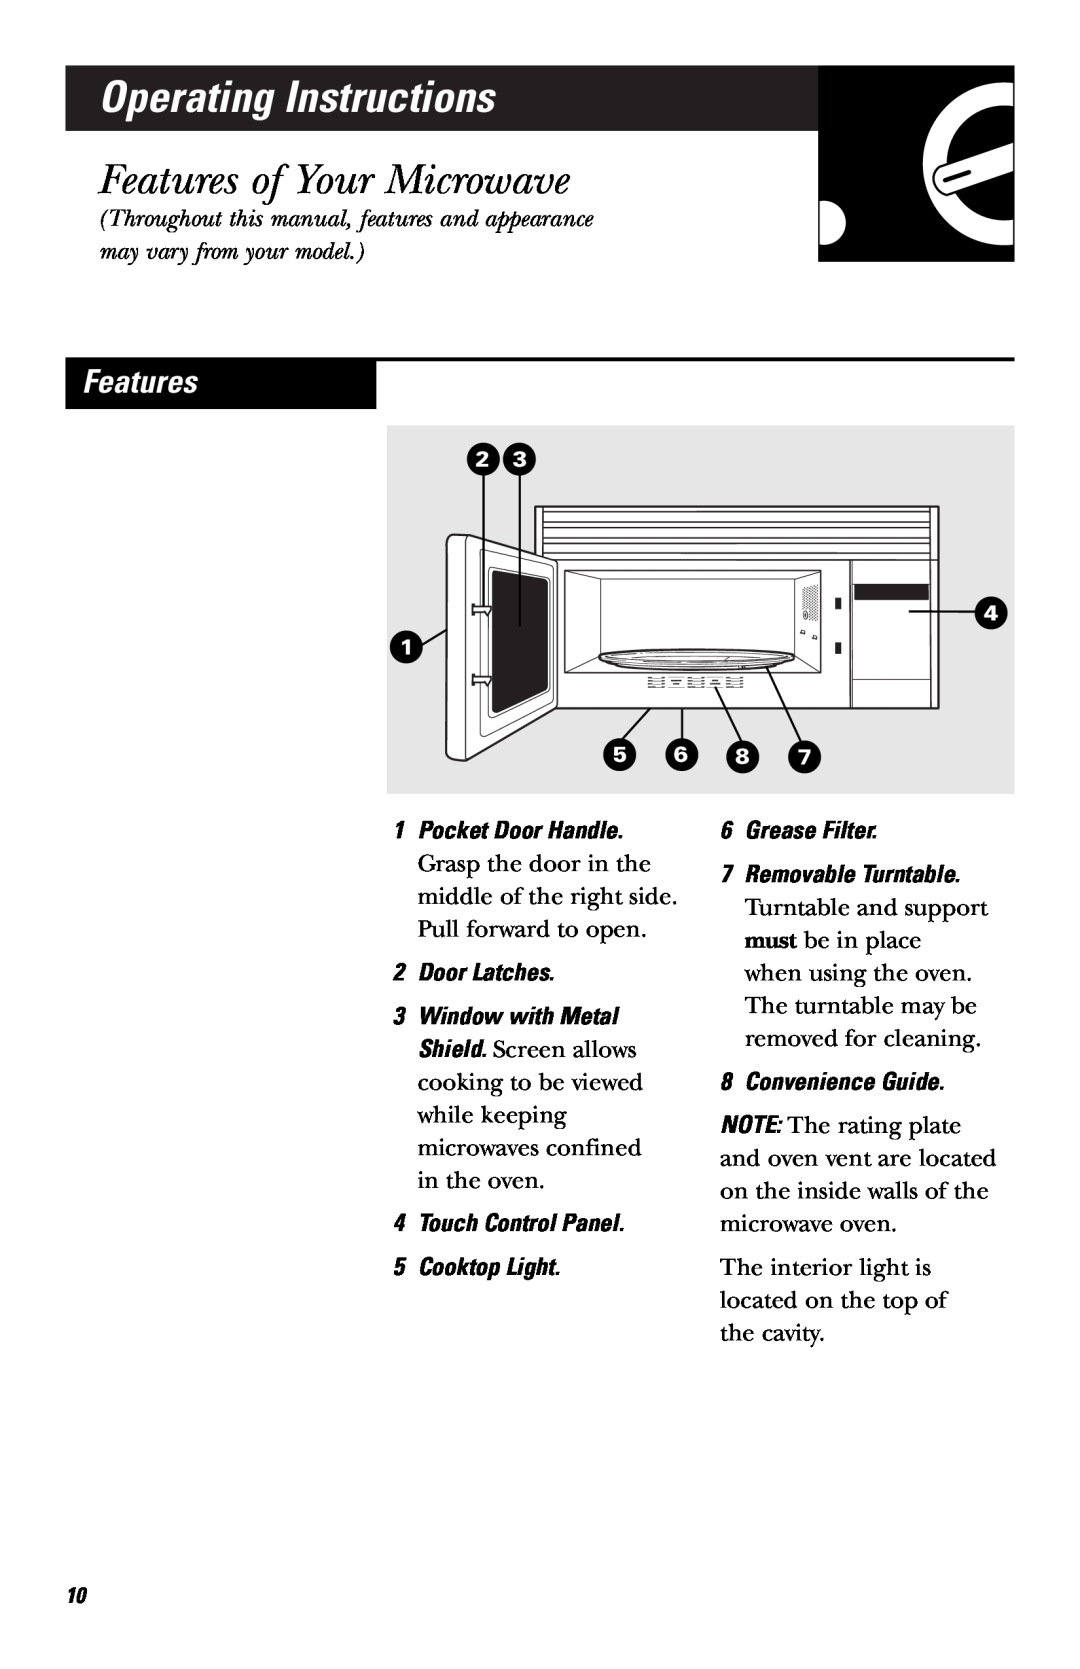 Hotpoint RVM1635 Operating Instructions, Features of Your Microwave, Pocket Door Handle, Door Latches, Convenience Guide 